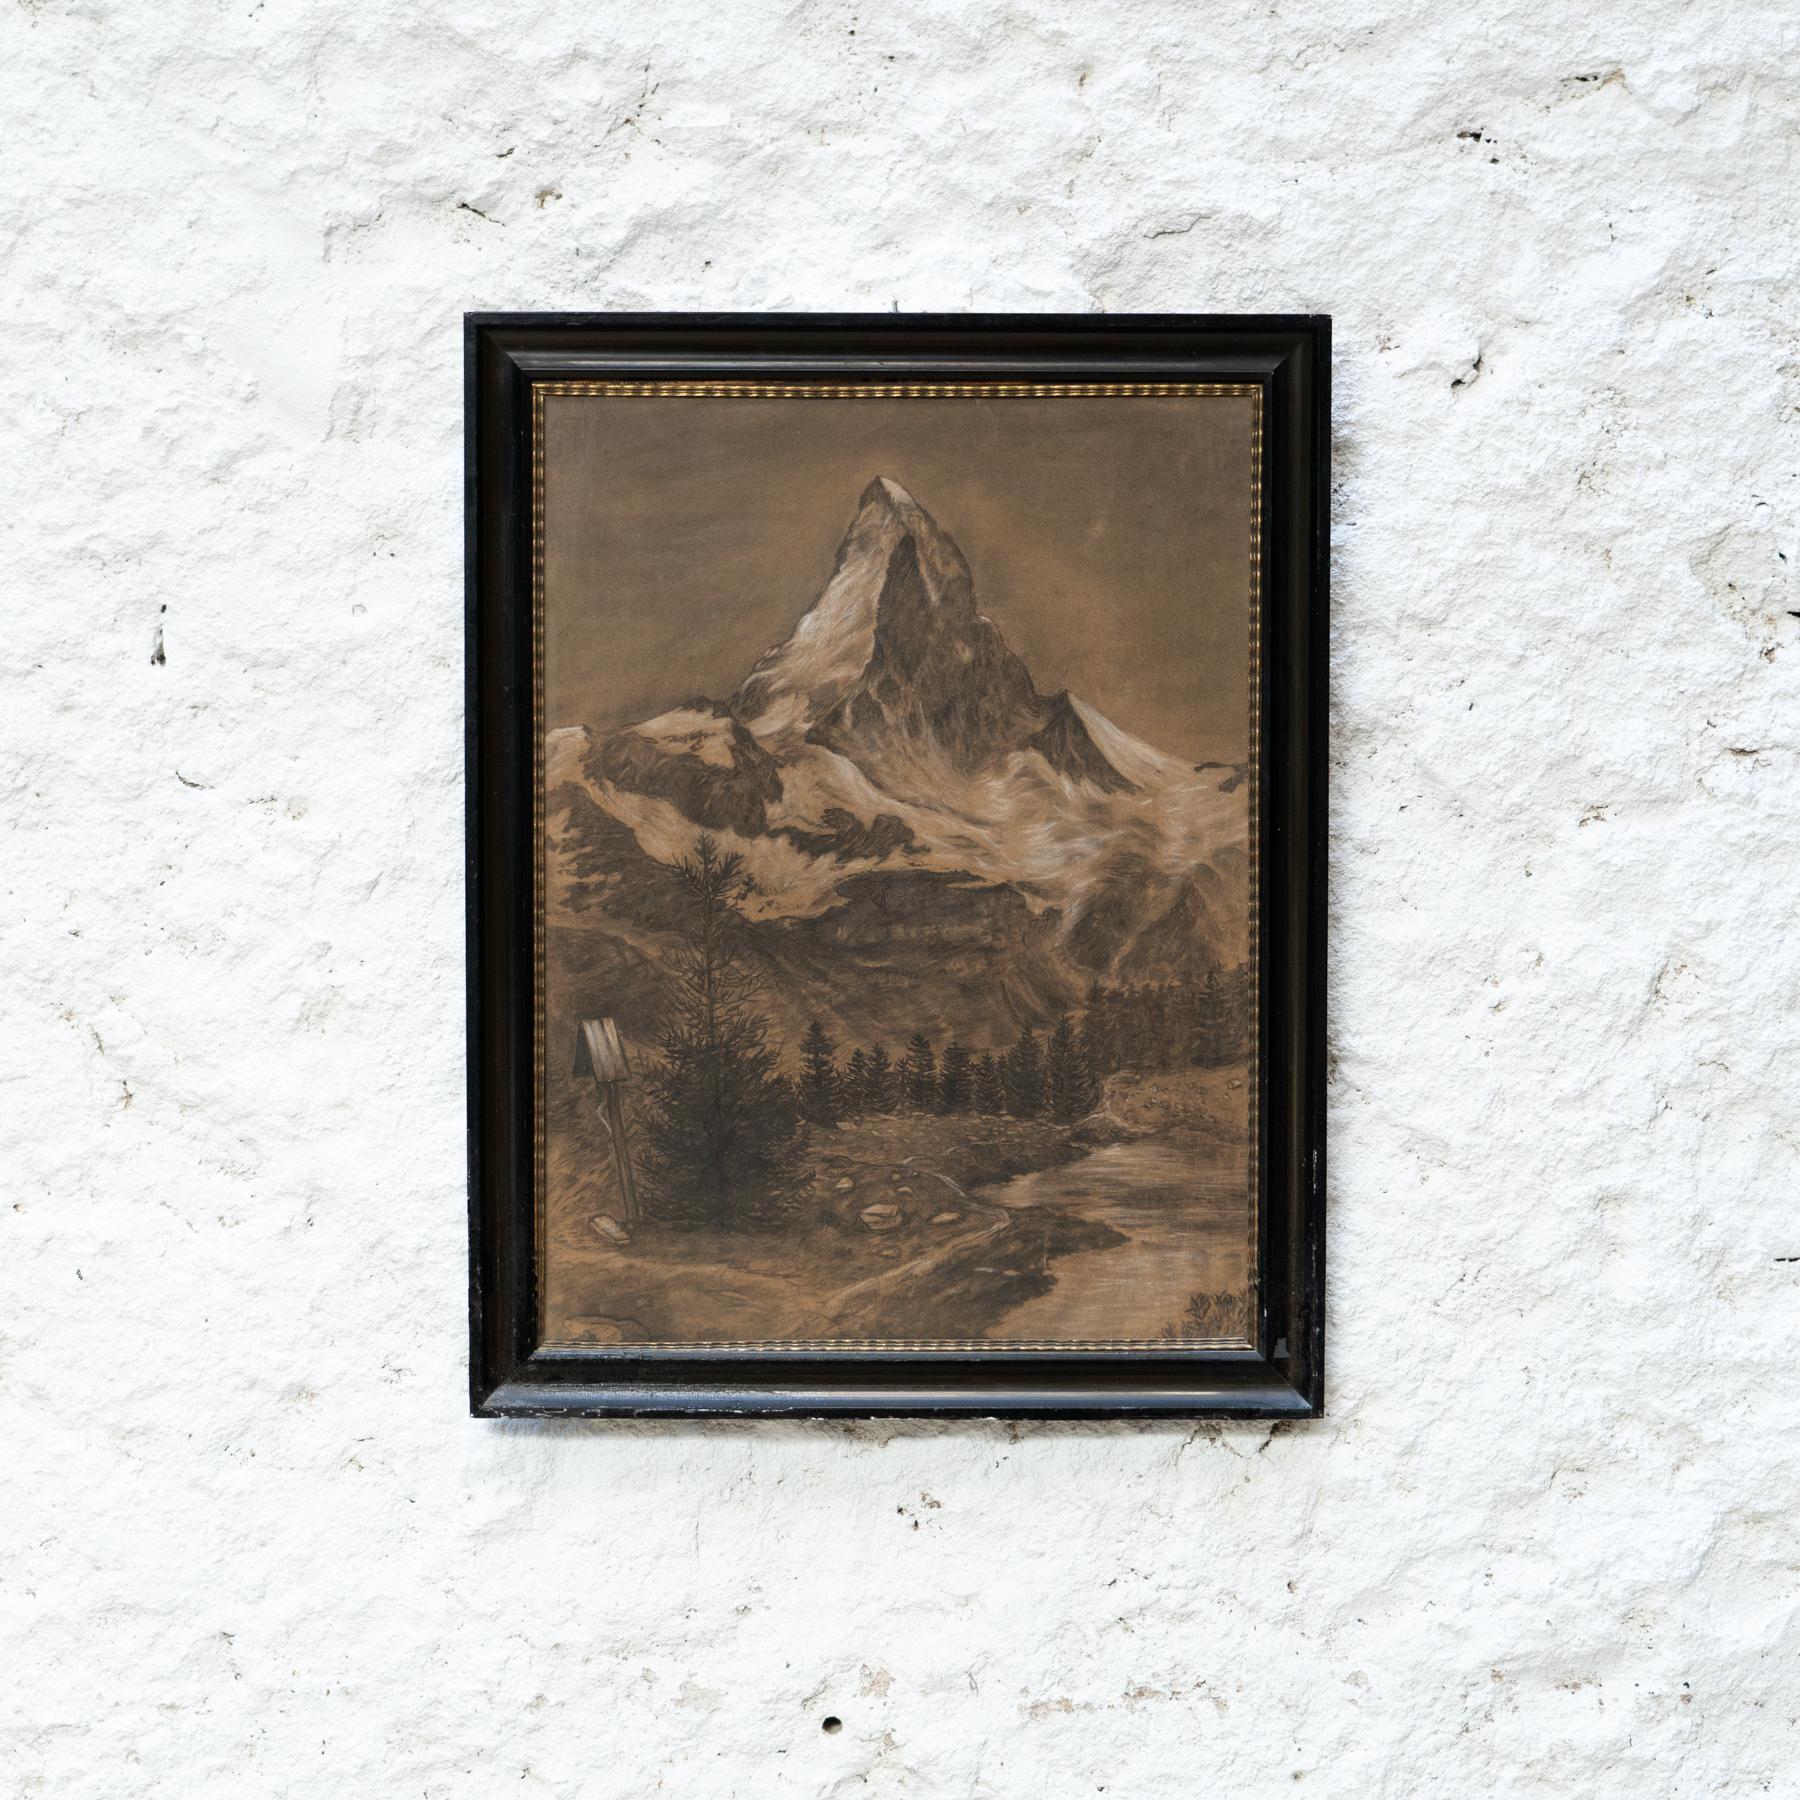 Early 20th Century Framed Drawing Matterhorn Artwork

By unknown artist, from France

In original condition, with minor wear consistent of age and use, preserving a beautiful patina